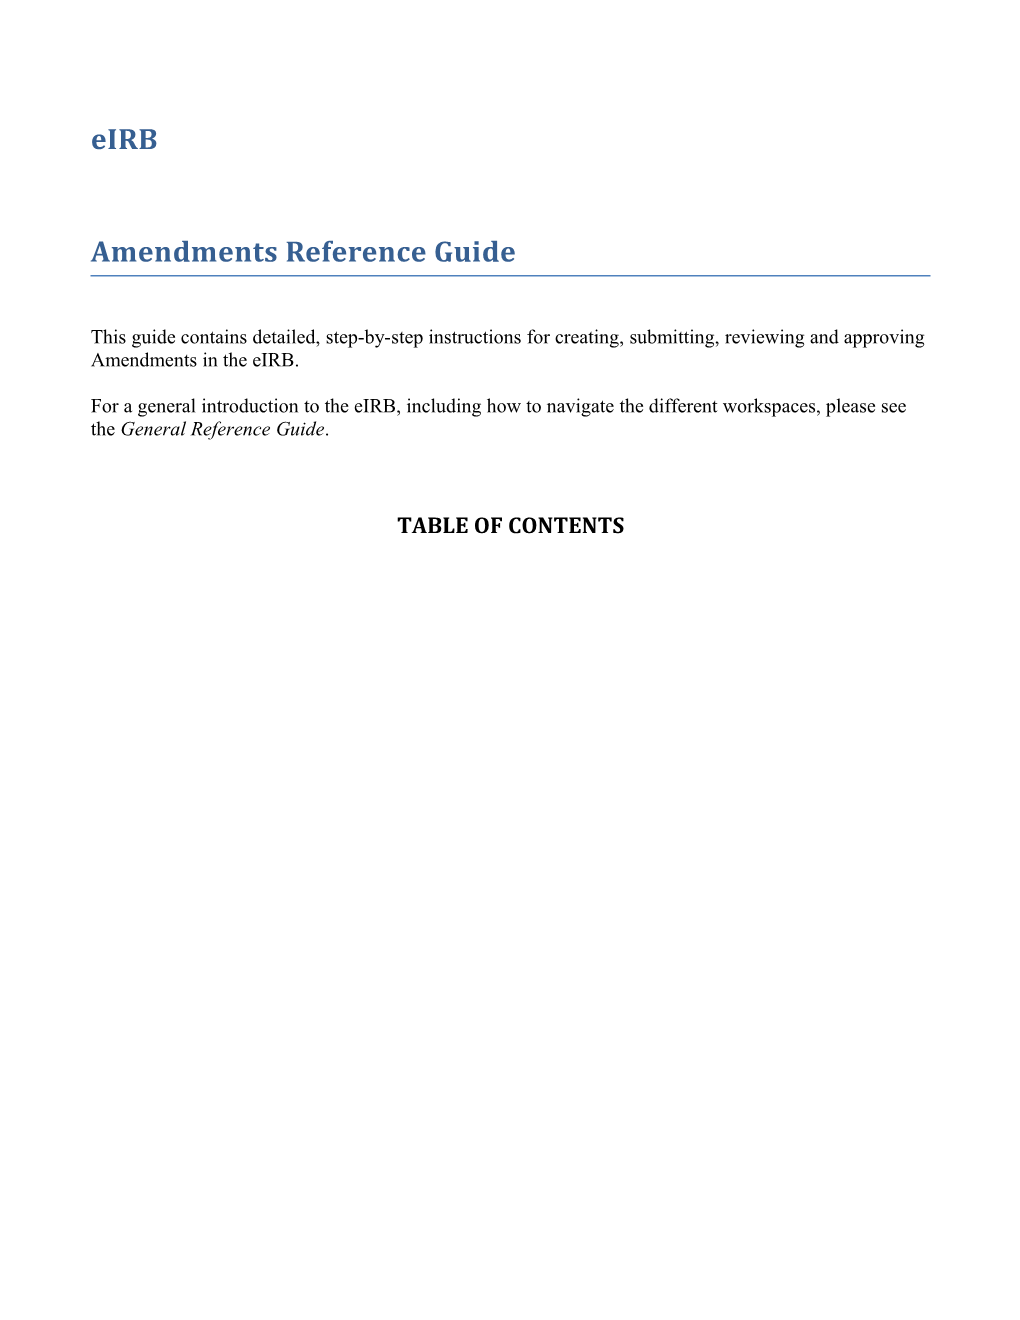 Amendments Reference Guide